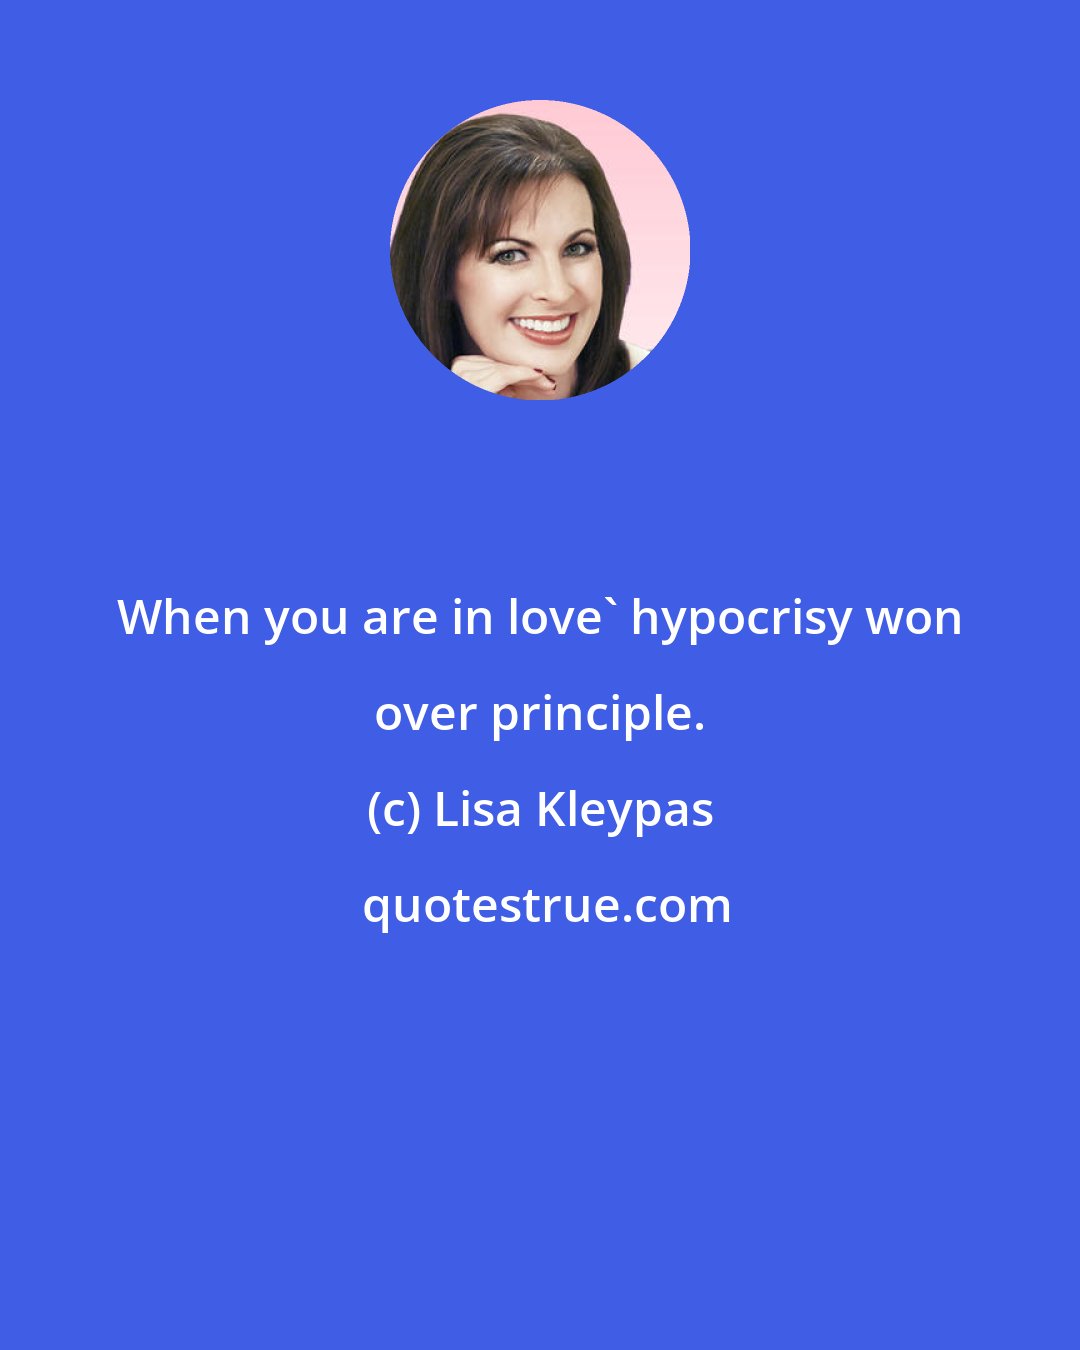 Lisa Kleypas: When you are in love' hypocrisy won over principle.